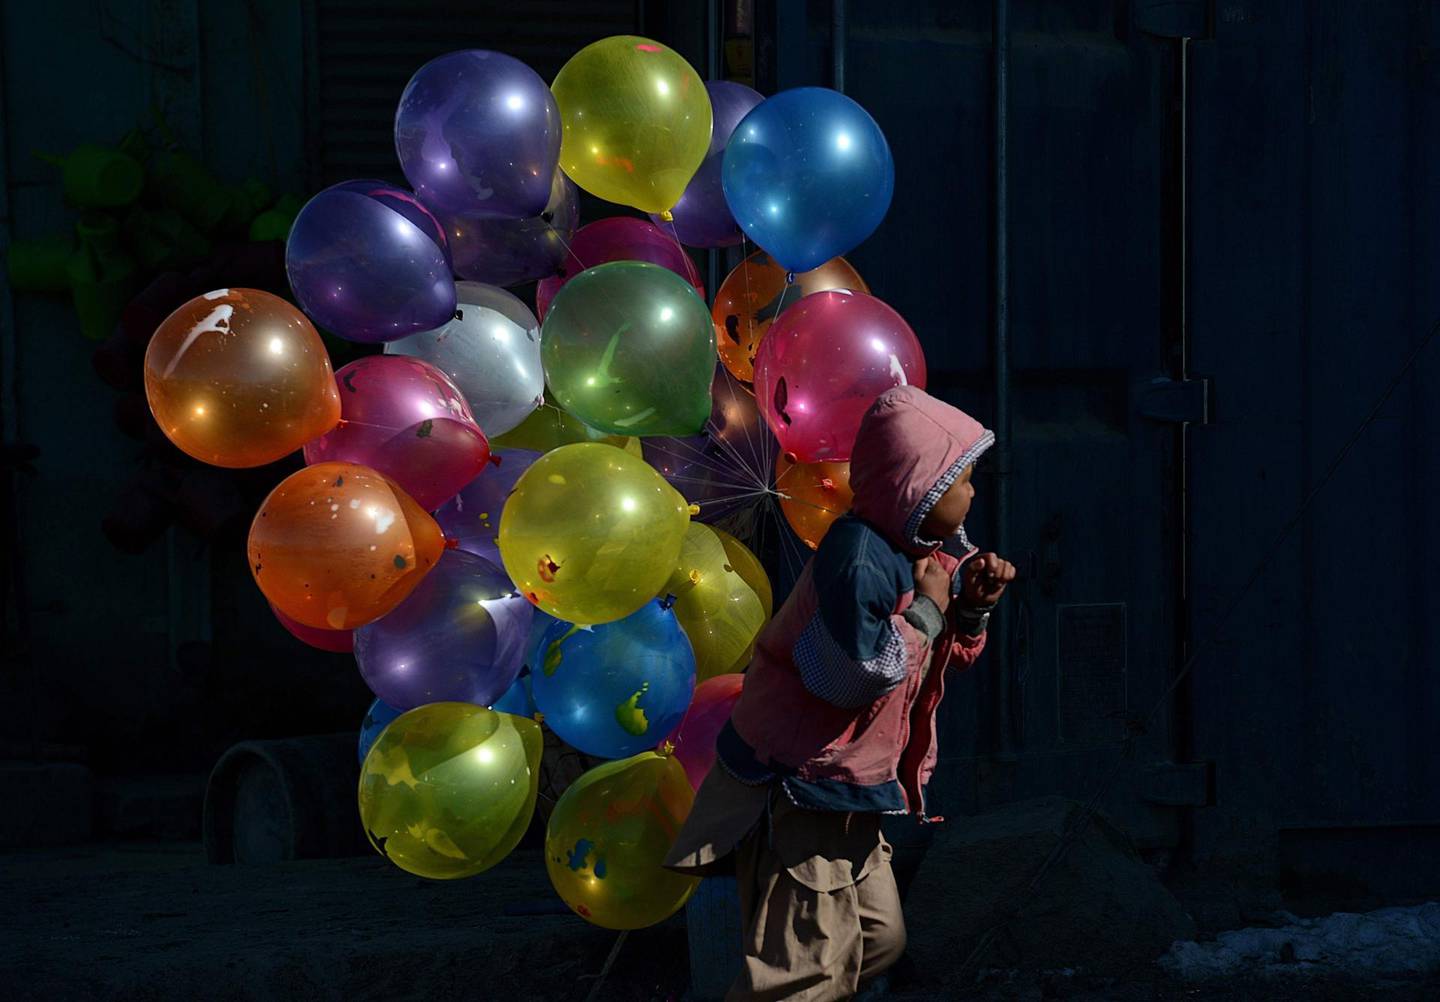 (FILES) In this file photo taken on February 7, 2013 an Afghan boy walks with balloons for sale on a cold winter's day in Kabul.
Agence France-Presse's chief photographer in Kabul, Shah Marai, was killed April 30, AFP has confirmed, in a secondary explosion targeting a group of journalists who had rushed to the scene of a suicide blast in the Afghan capital. Marai joined AFP as a driver in 1996, the year the Taliban seized power, and began taking pictures on the side, covering stories including the US invasion in 2001. In 2002 he became a full-time photo stringer, rising through the ranks to become chief photographer in the bureau. He leaves behind six children, including a newborn daughter.

  / AFP PHOTO / Shah MARAI